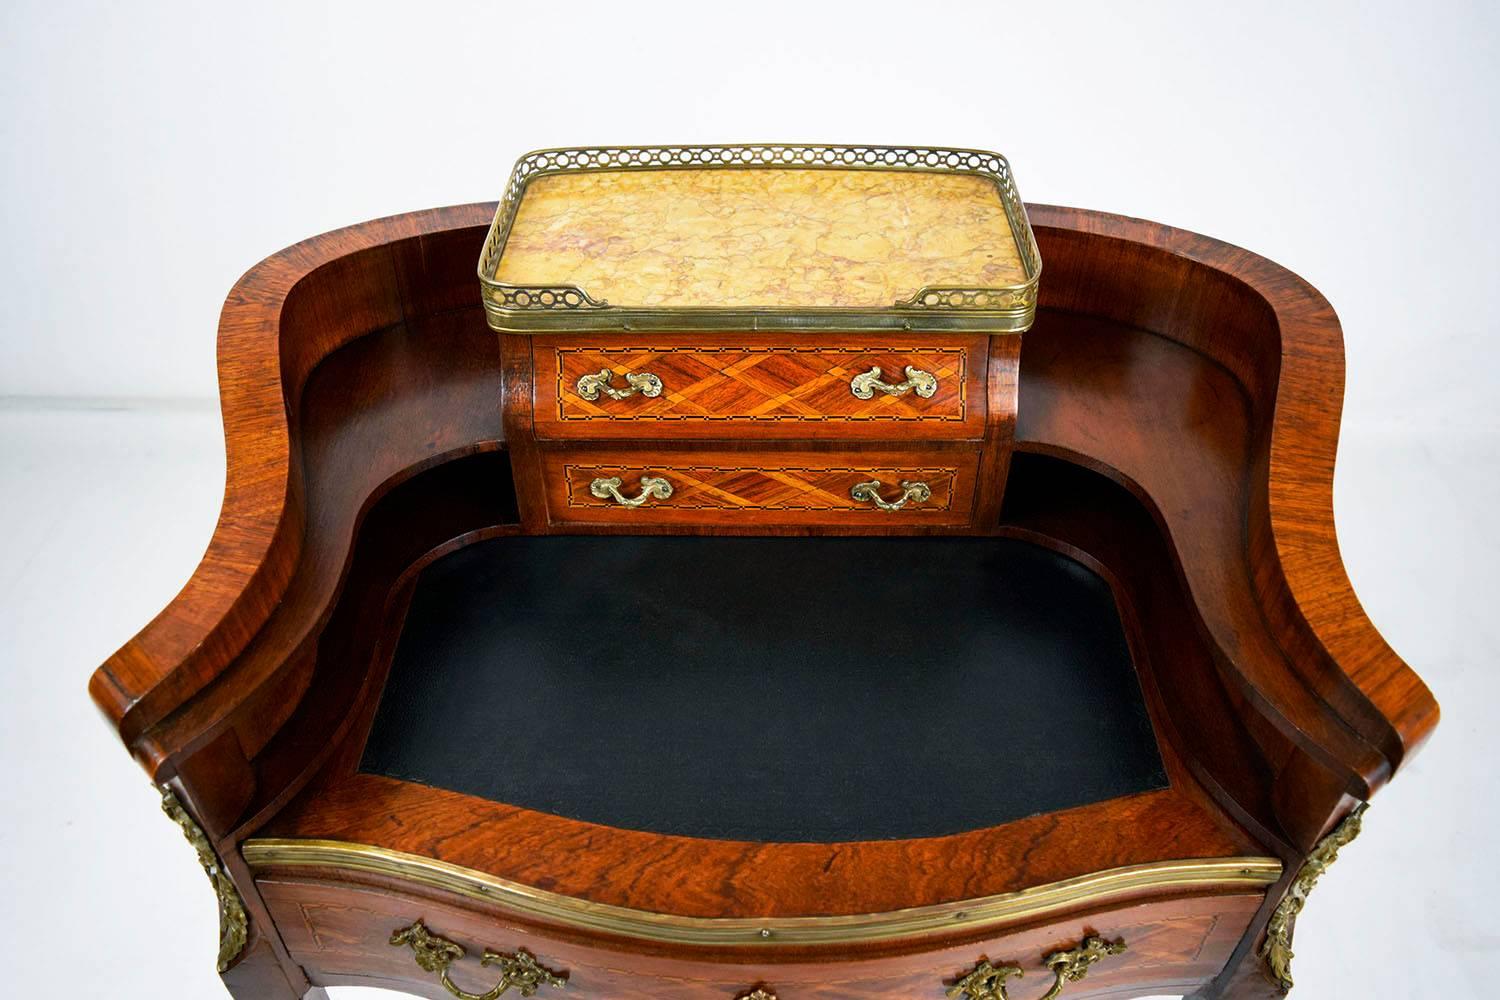 This 1900s antique French Louis XV style desk is made of wood finished in a mahogany color stain. The facade of the desk is adorned with geometric marquetry decorations. Along the top of the desk is a brass gallery with a marble surface. On the top